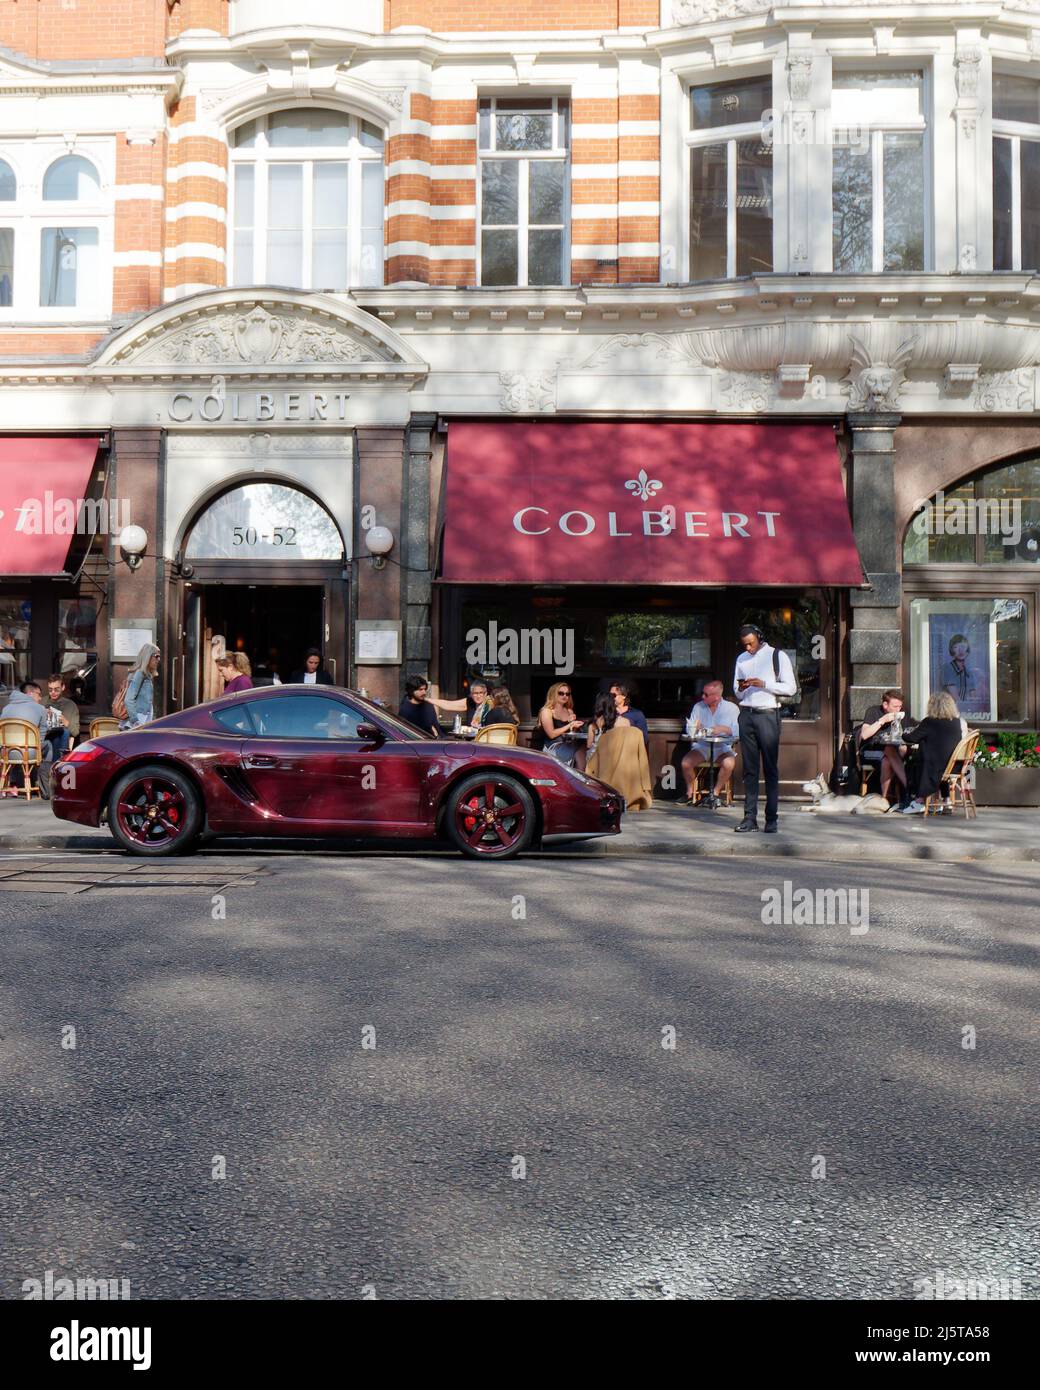 London, Greater London, England, April 16 2022: Purple Porsche parked outside Colbert, a French Cafe Restaurant in Sloane Square with a purple awning. Stock Photo